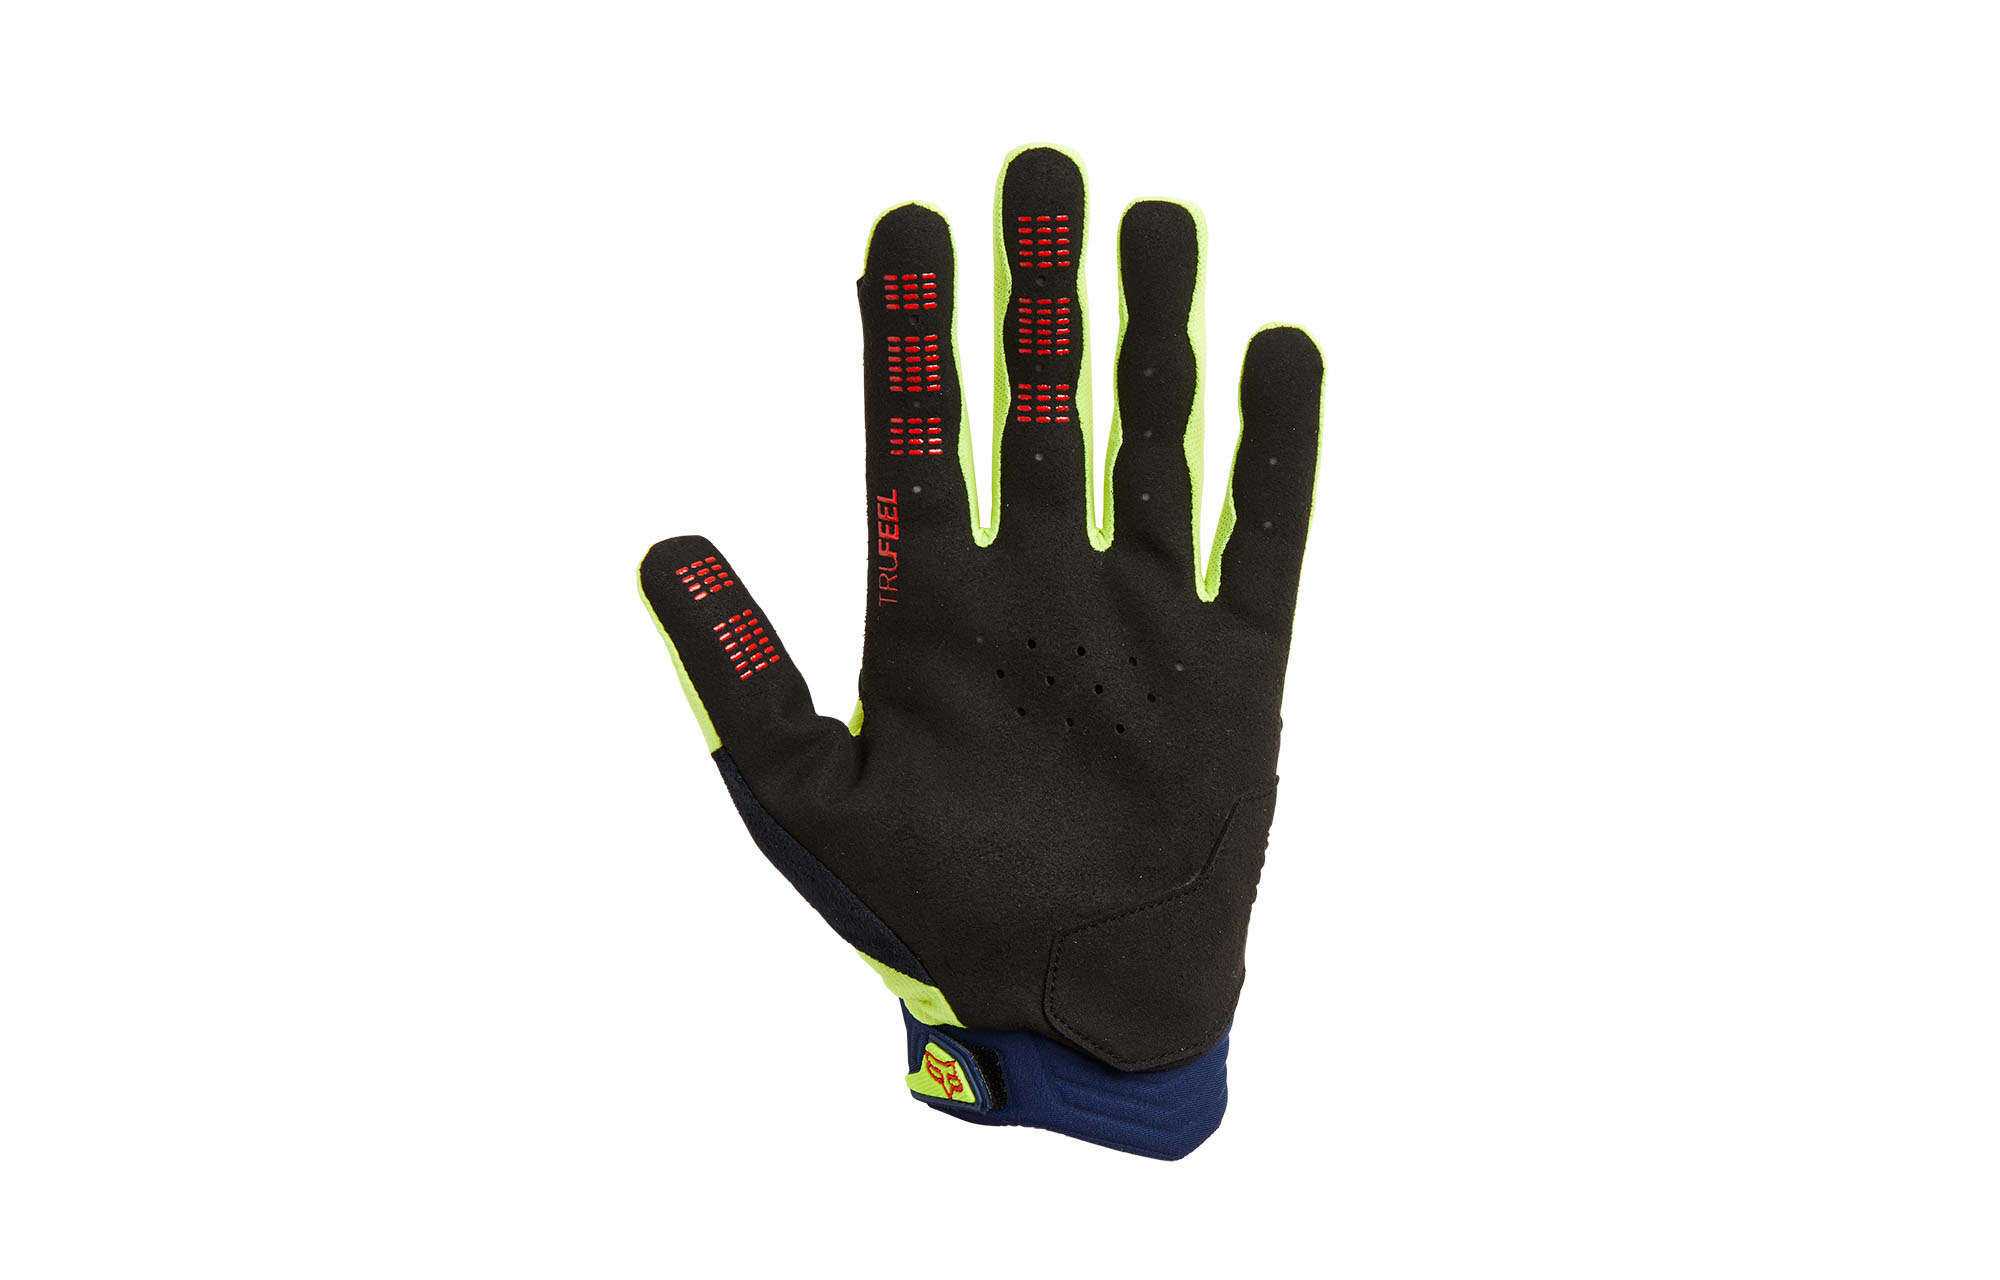 FOX DEFEND GLOVES FLUO YELLOW image number 0